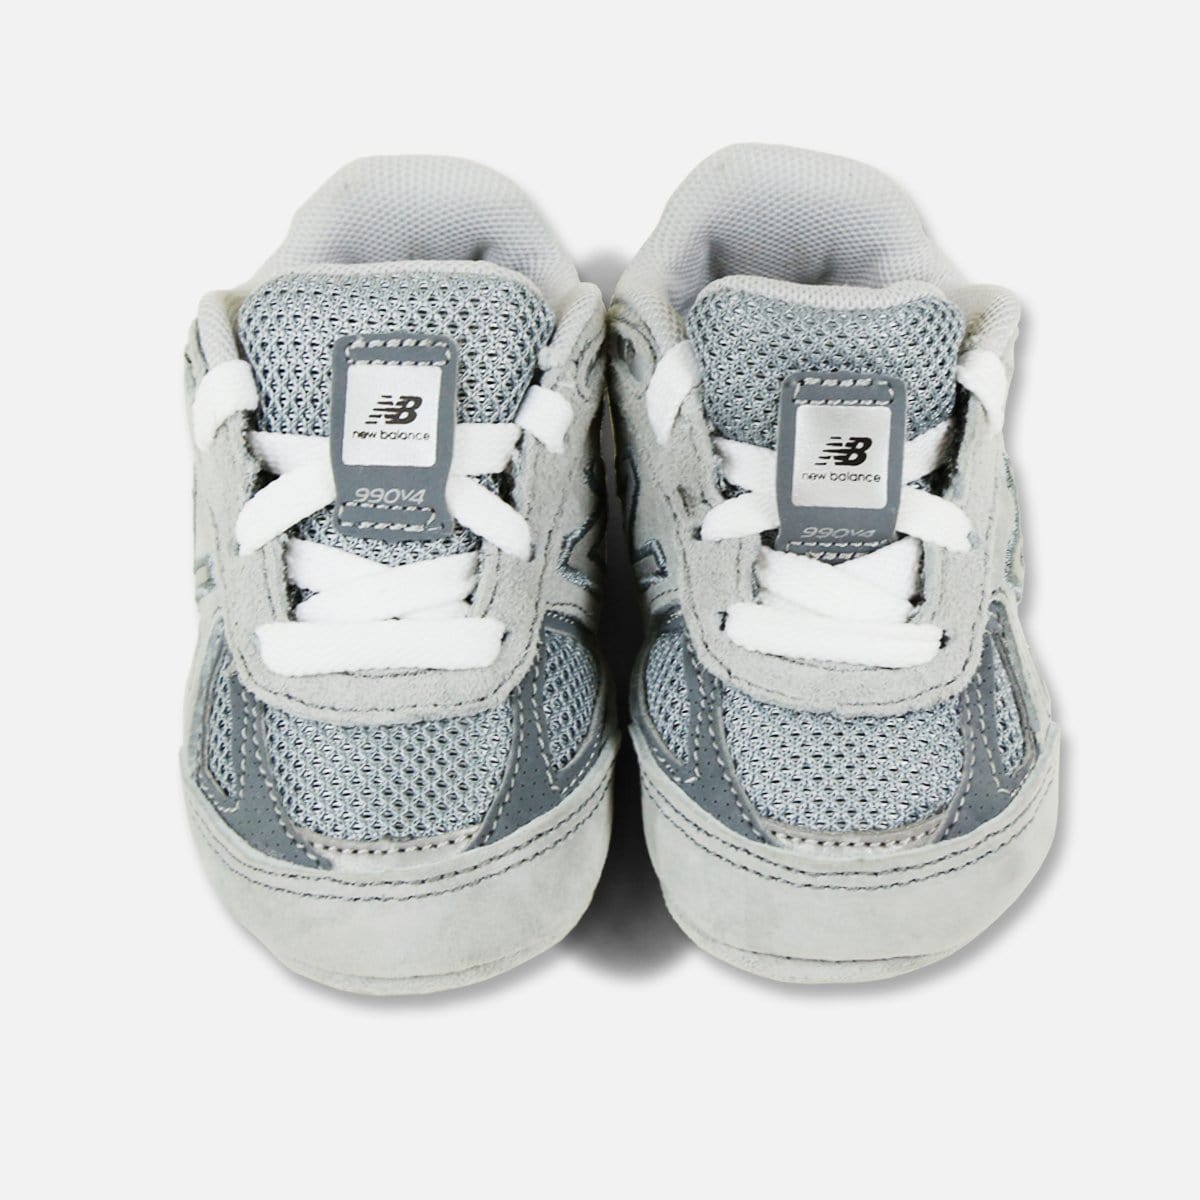 RUVilla.com is where to buy the New Balance 990 Infant (Grey/Castlerock)!